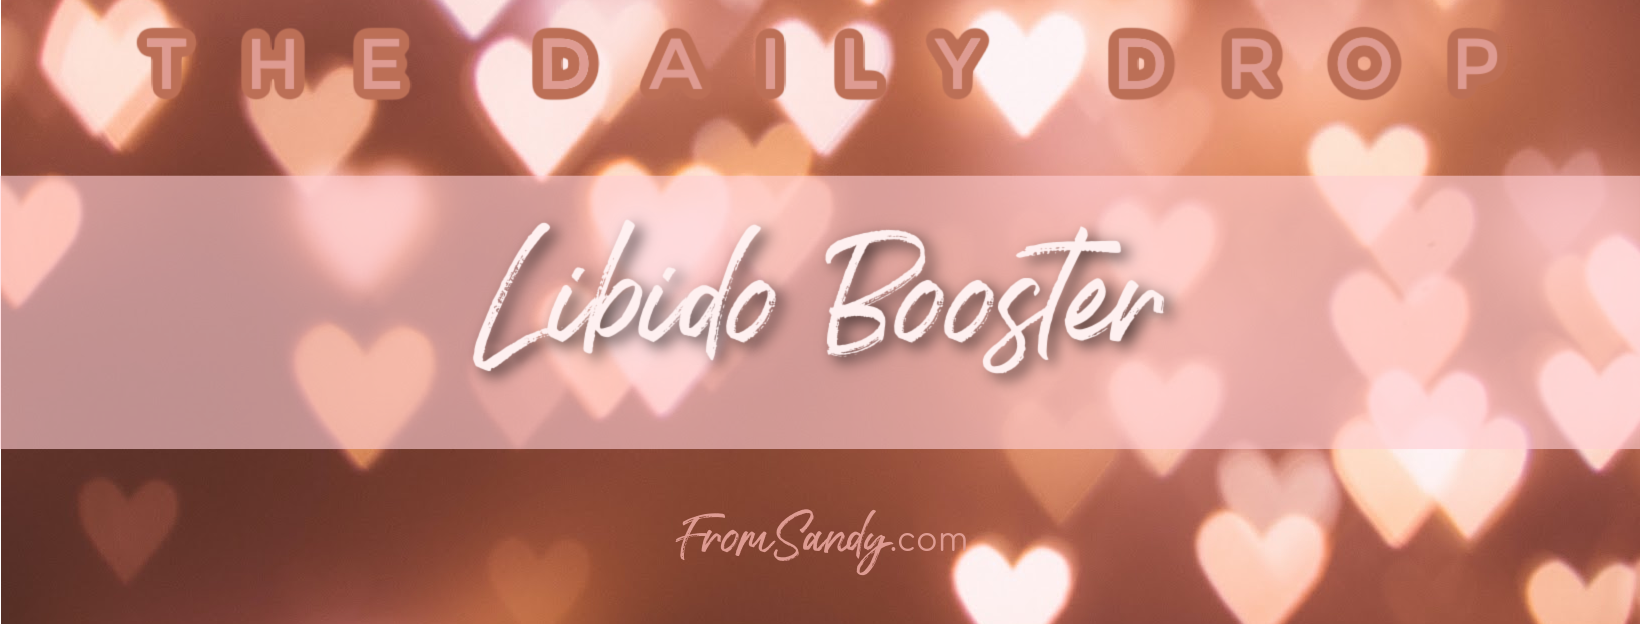 Libido Booster, From Sandy